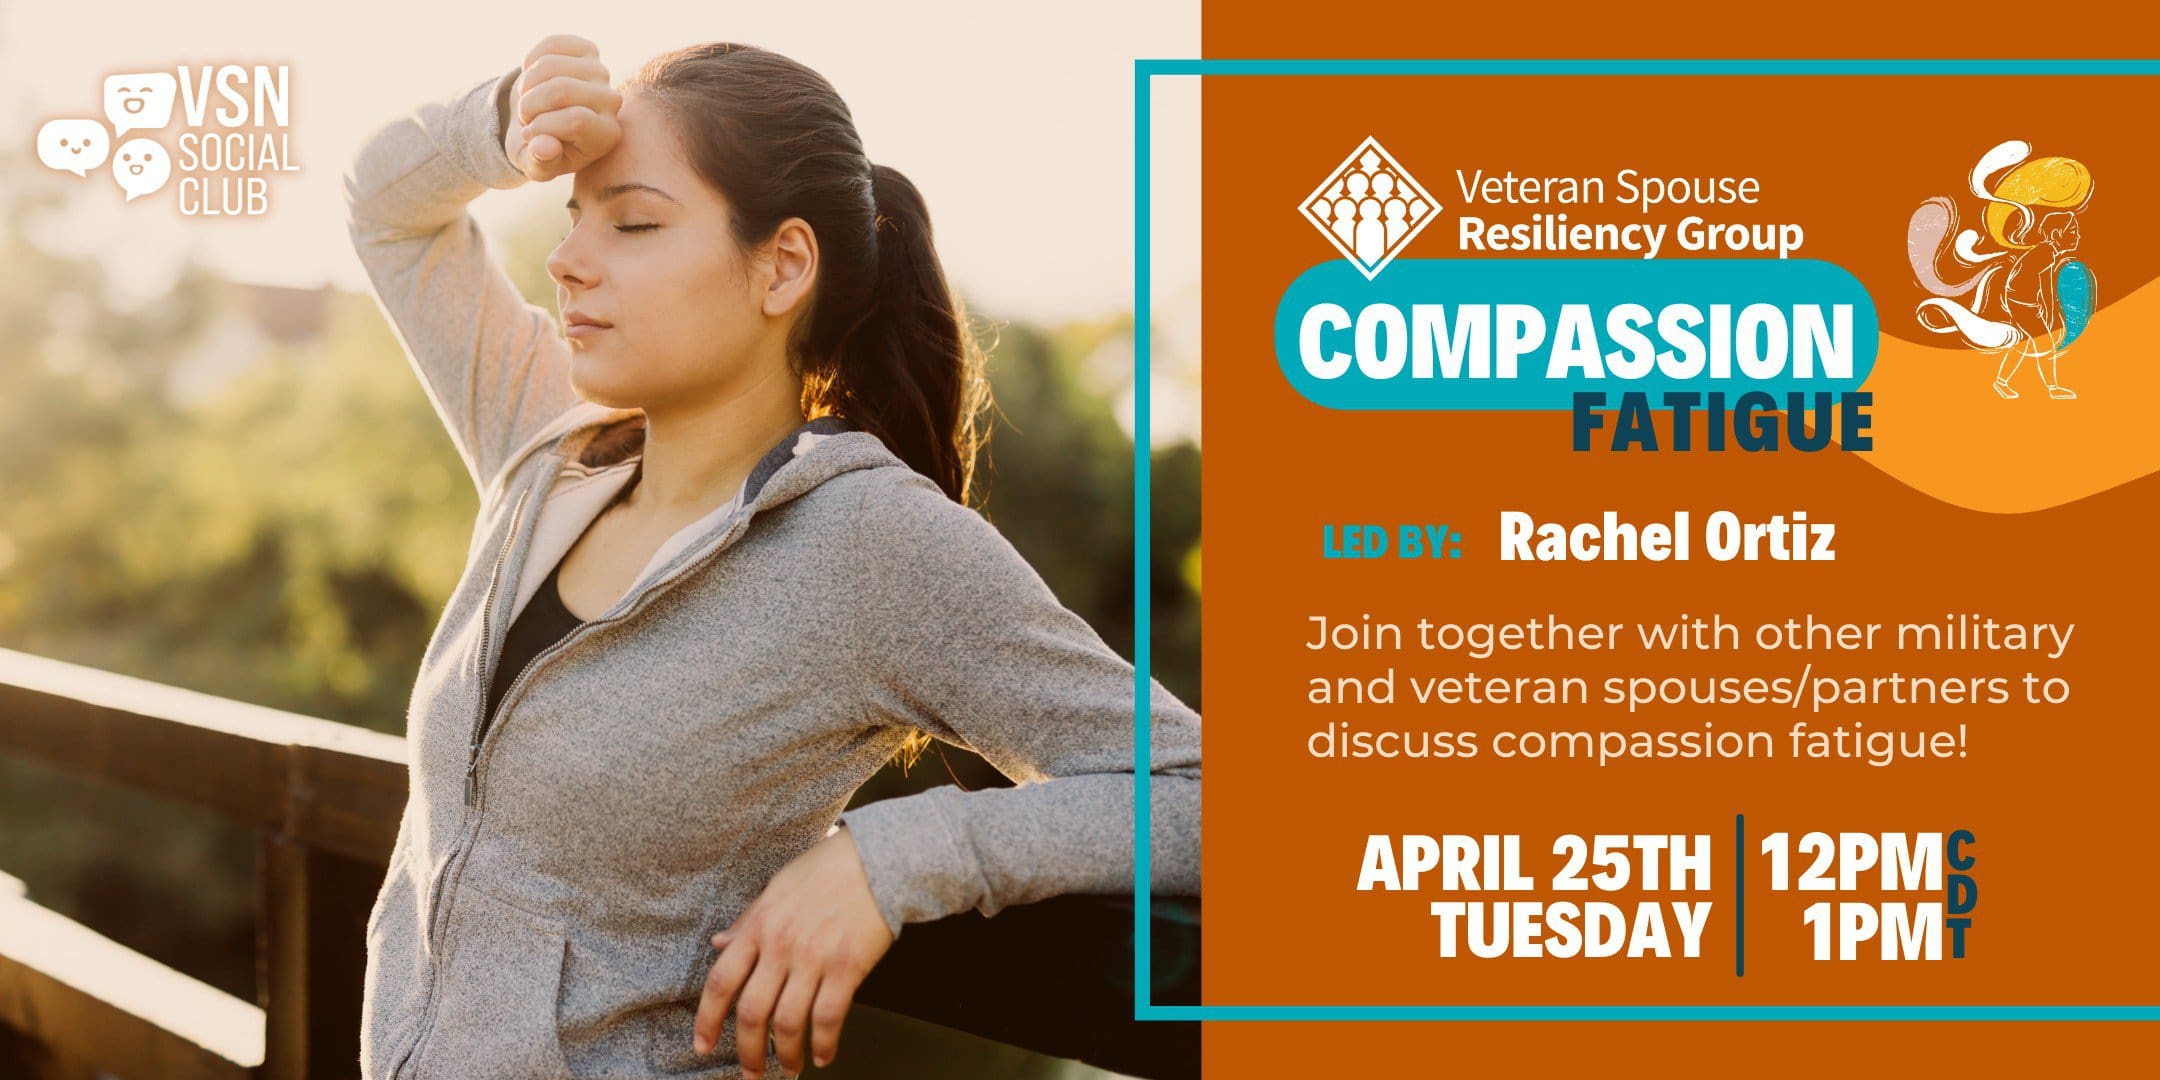 V-SRG Compassion Fatigue on April 25th from 12-1pm CDT